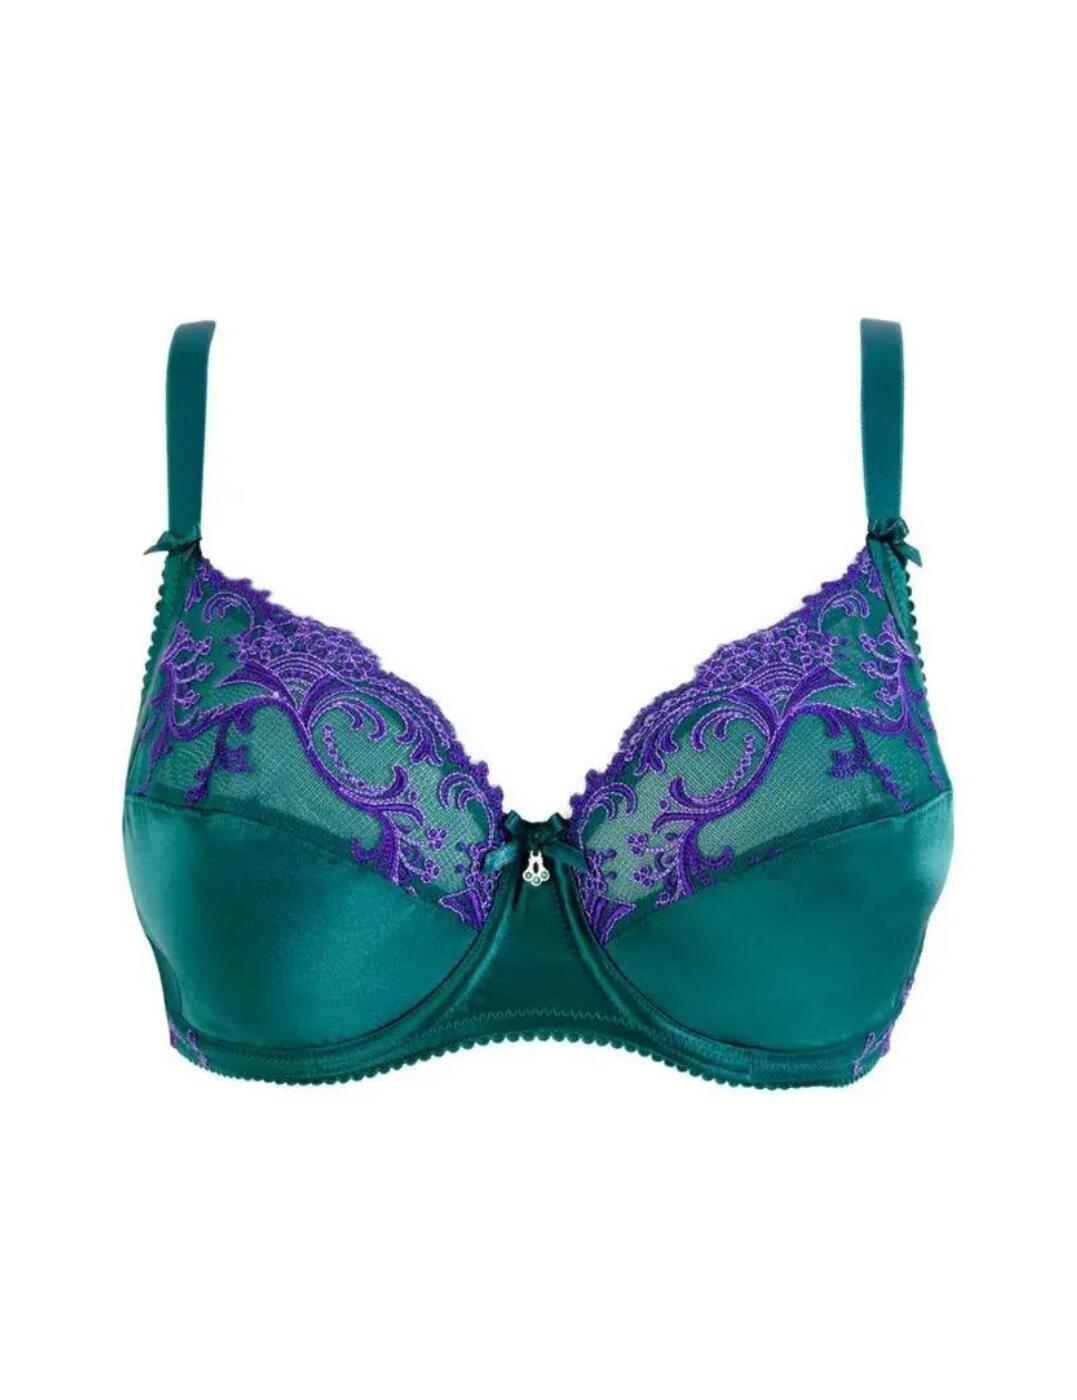 Soie Bras for Women sale - discounted price